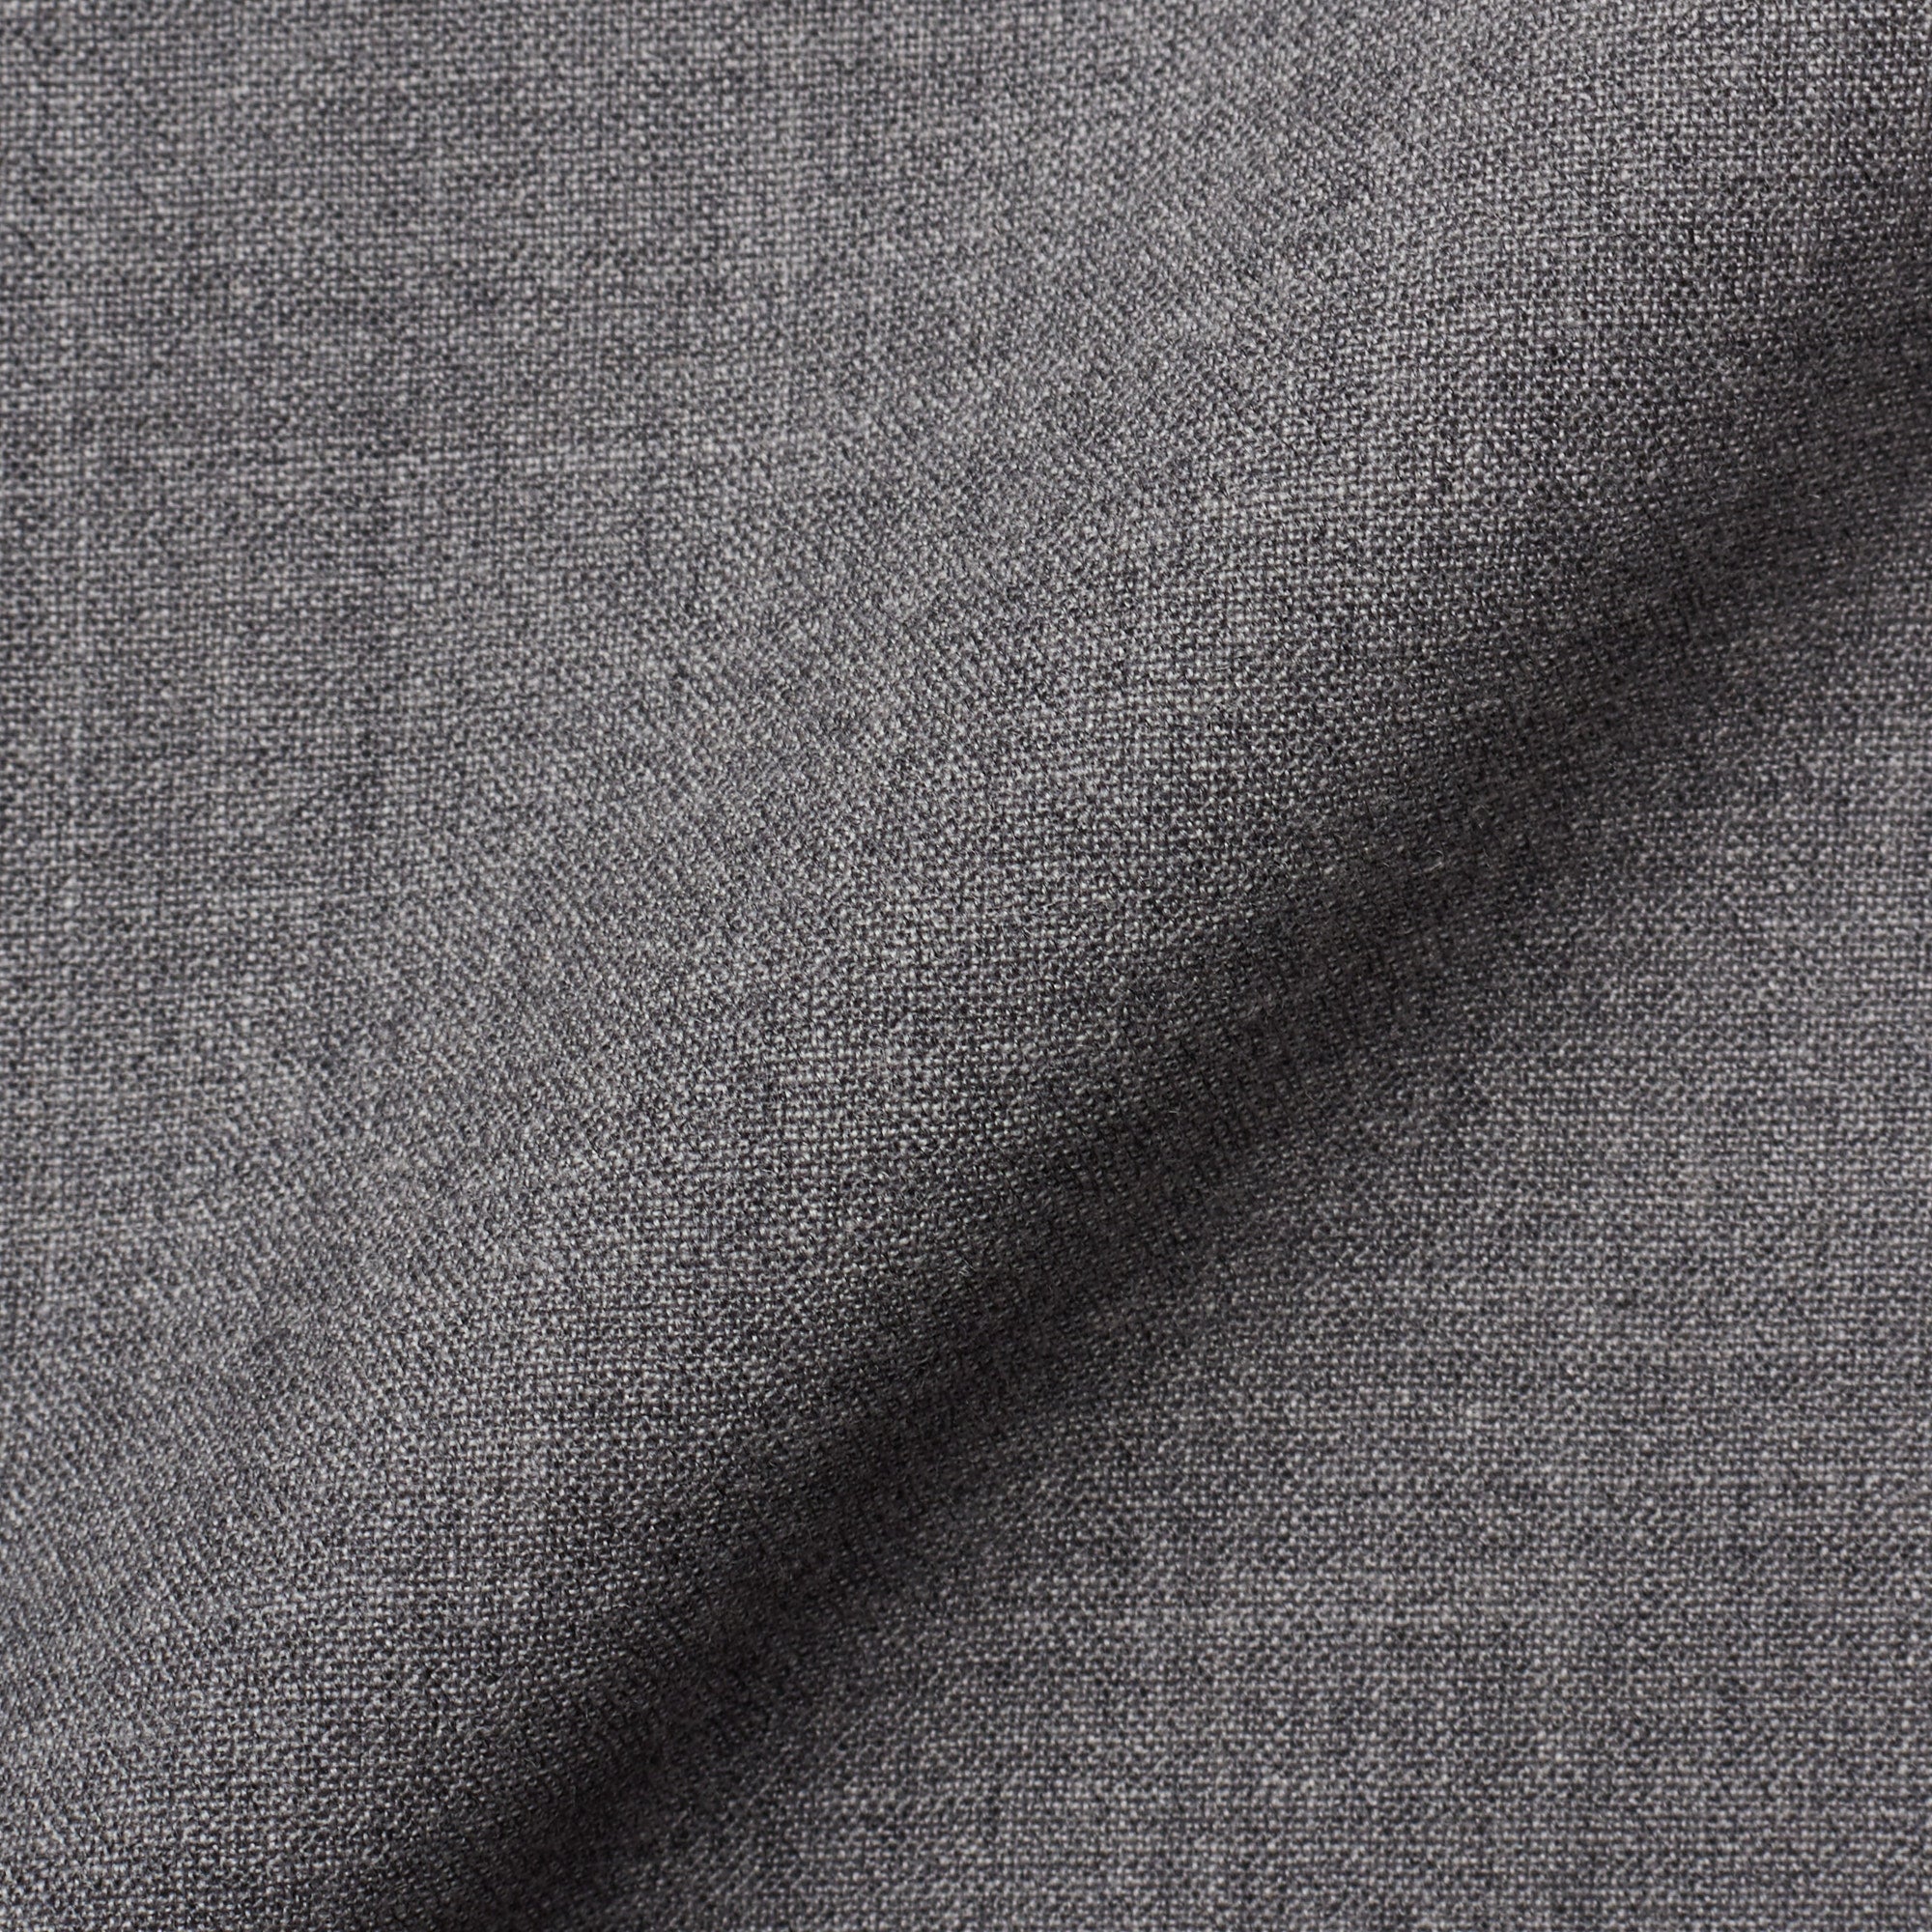 CESARE ATTOLINI Handmade Chambray Gray Wool Business Suit NEW CESARE ATTOLINI